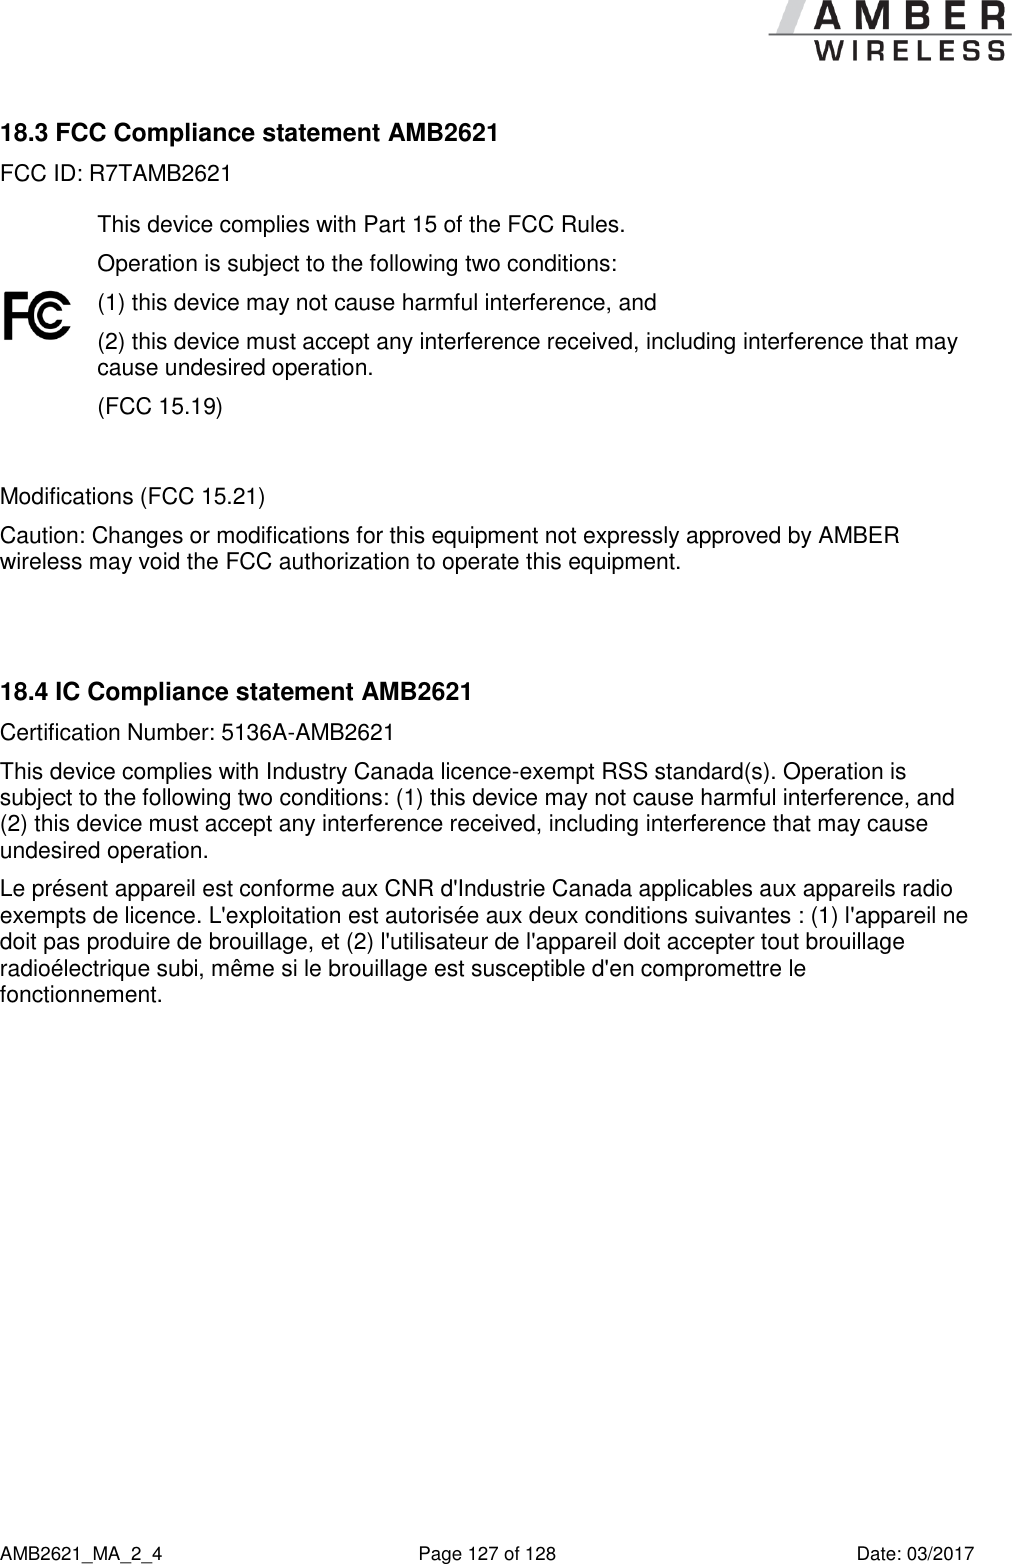      AMB2621_MA_2_4  Page 127 of 128  Date: 03/2017 18.3 FCC Compliance statement AMB2621 FCC ID: R7TAMB2621  This device complies with Part 15 of the FCC Rules.  Operation is subject to the following two conditions:  (1) this device may not cause harmful interference, and  (2) this device must accept any interference received, including interference that may cause undesired operation.  (FCC 15.19)  Modifications (FCC 15.21) Caution: Changes or modifications for this equipment not expressly approved by AMBER wireless may void the FCC authorization to operate this equipment.   18.4 IC Compliance statement AMB2621 Certification Number: 5136A-AMB2621 This device complies with Industry Canada licence-exempt RSS standard(s). Operation is subject to the following two conditions: (1) this device may not cause harmful interference, and (2) this device must accept any interference received, including interference that may cause undesired operation. Le présent appareil est conforme aux CNR d&apos;Industrie Canada applicables aux appareils radio exempts de licence. L&apos;exploitation est autorisée aux deux conditions suivantes : (1) l&apos;appareil ne doit pas produire de brouillage, et (2) l&apos;utilisateur de l&apos;appareil doit accepter tout brouillage radioélectrique subi, même si le brouillage est susceptible d&apos;en compromettre le fonctionnement.     